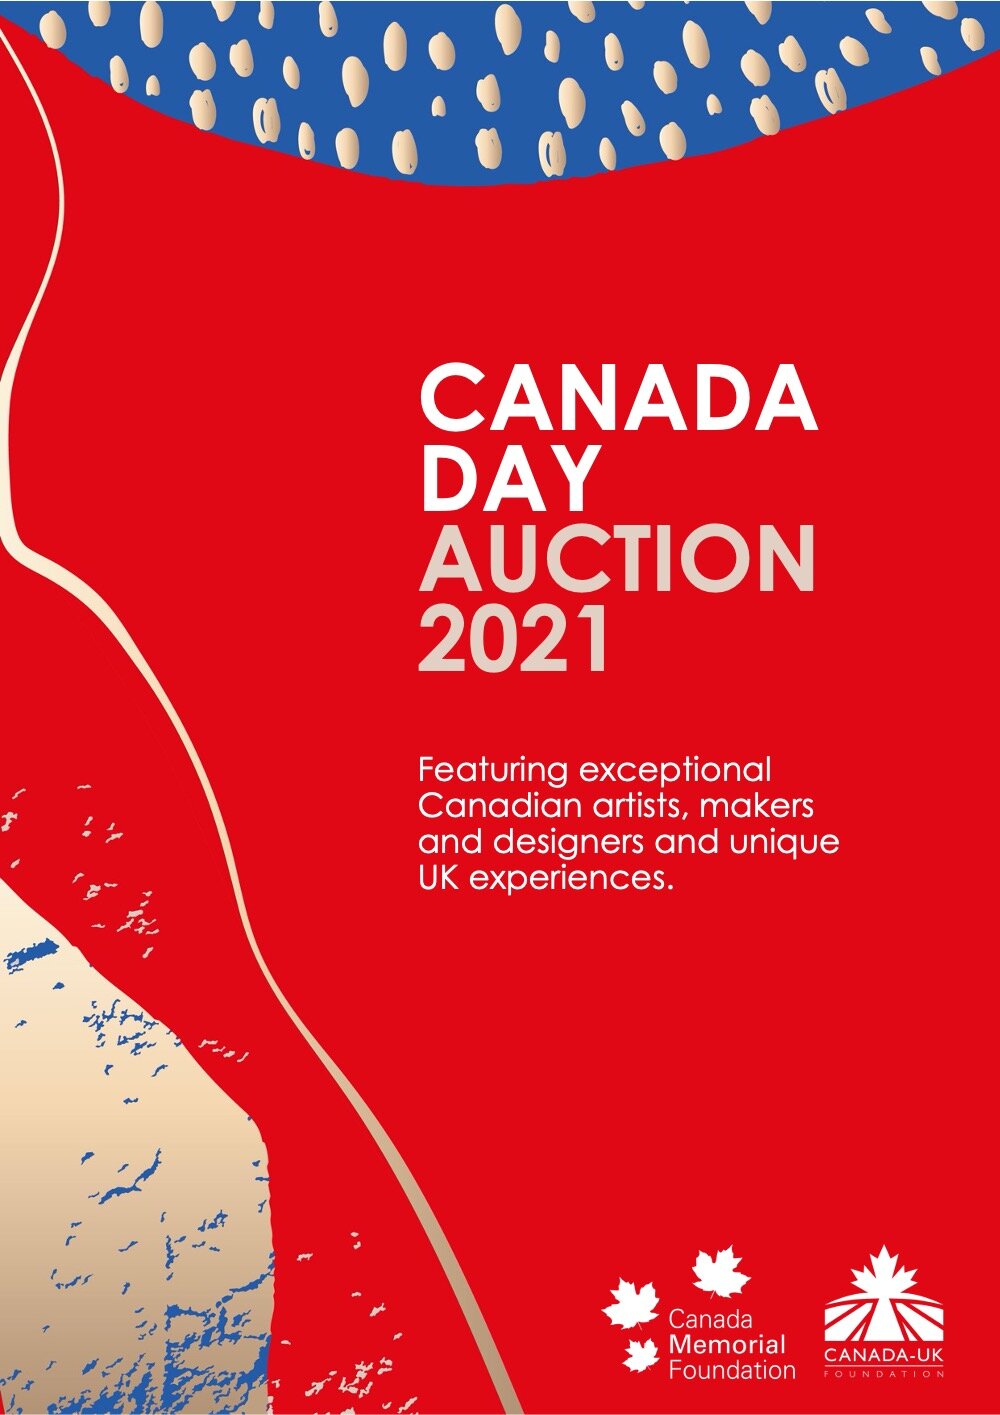   CANADA DAY AUCTION 2021    Featuring exceptional Canadian artists, makers and designers and unique UK experiences.  